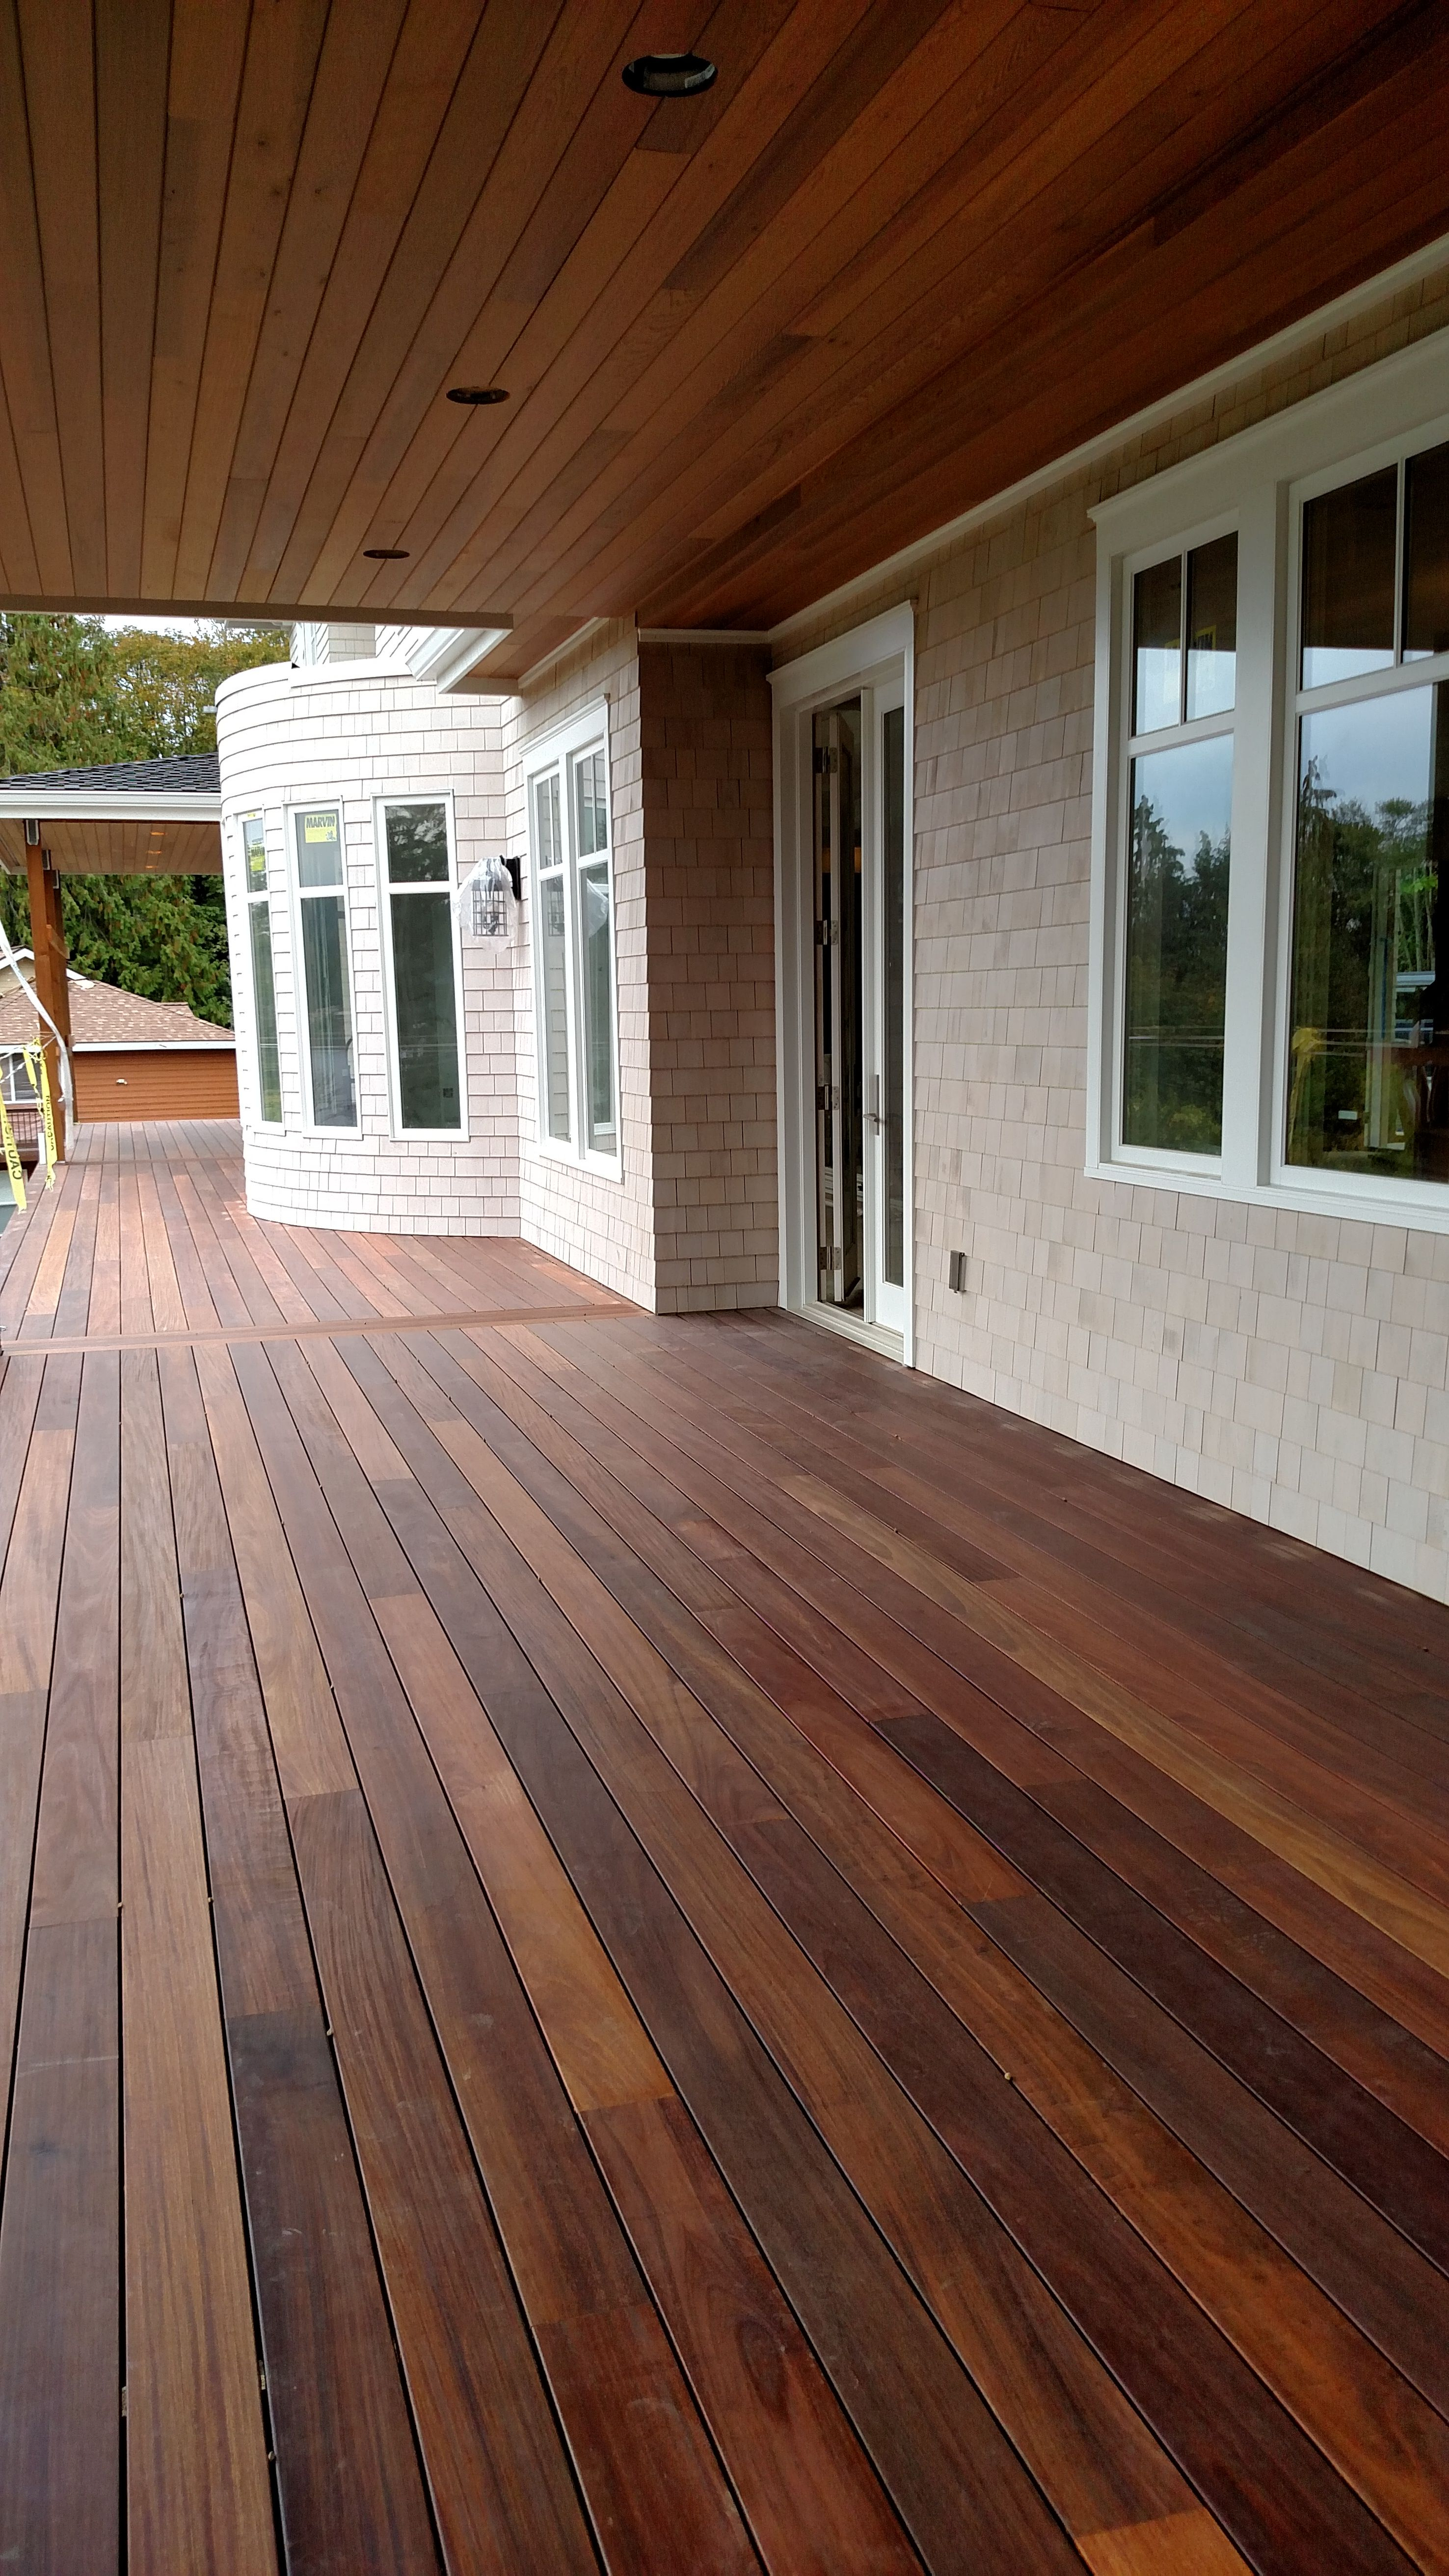 Mahogany Decking Applied With Penofin Exotic Hardwood Exterior Stain pertaining to proportions 2952 X 5248